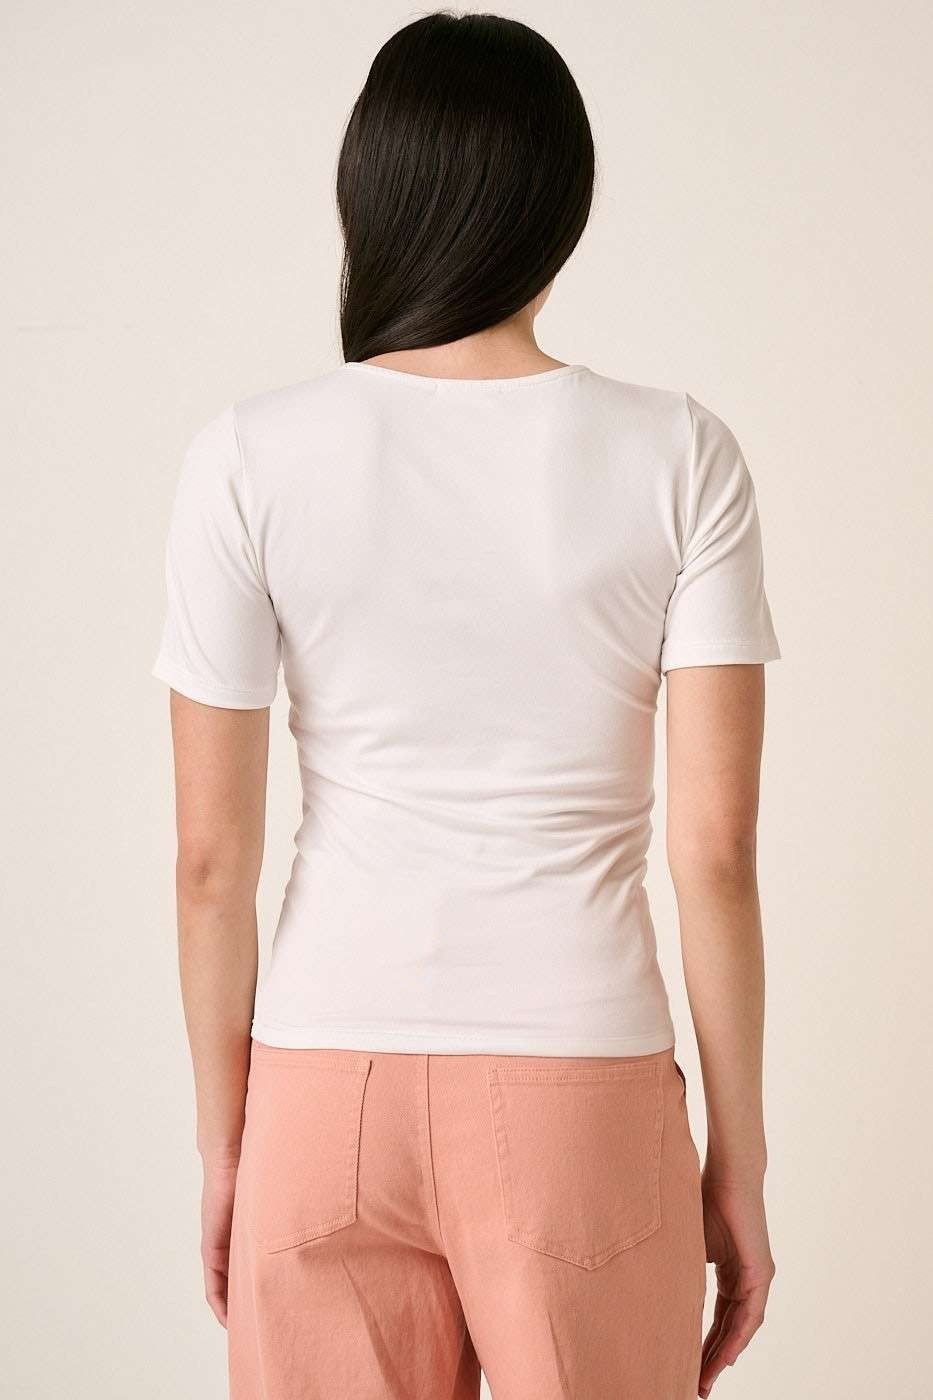 "Savoring Simplicity" Top (Off White) - Happily Ever Aften